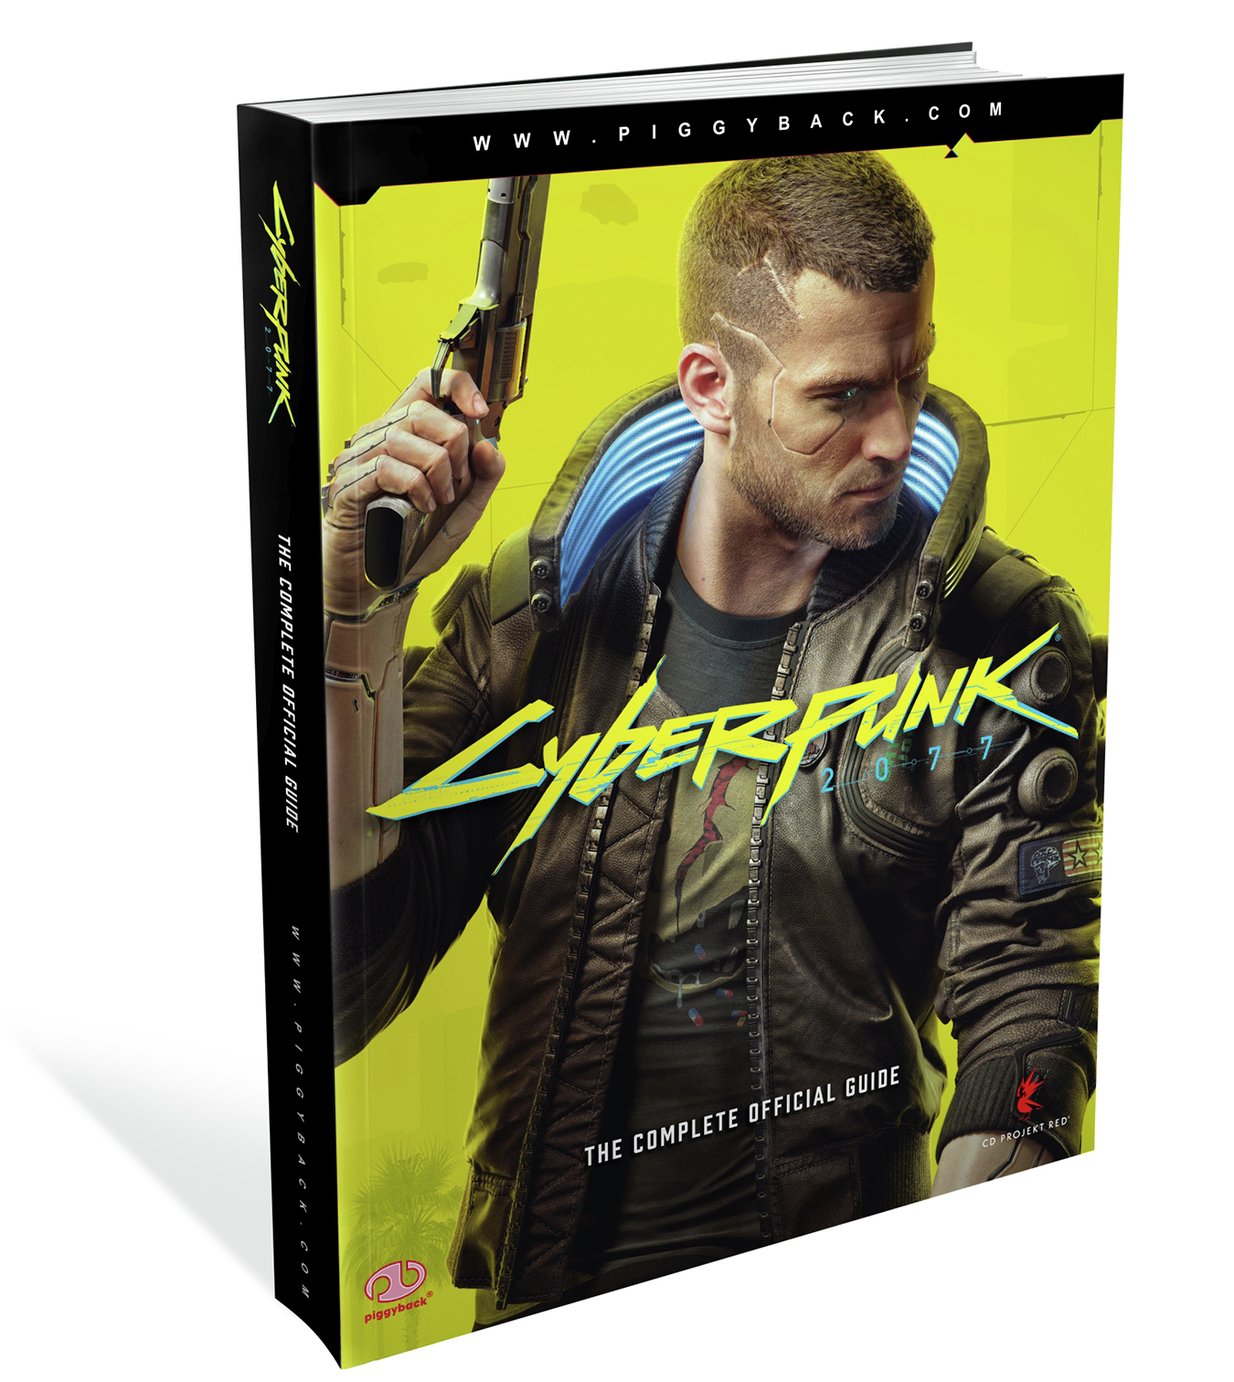 Cyberpunk 2077 The Complete Official Guide Review